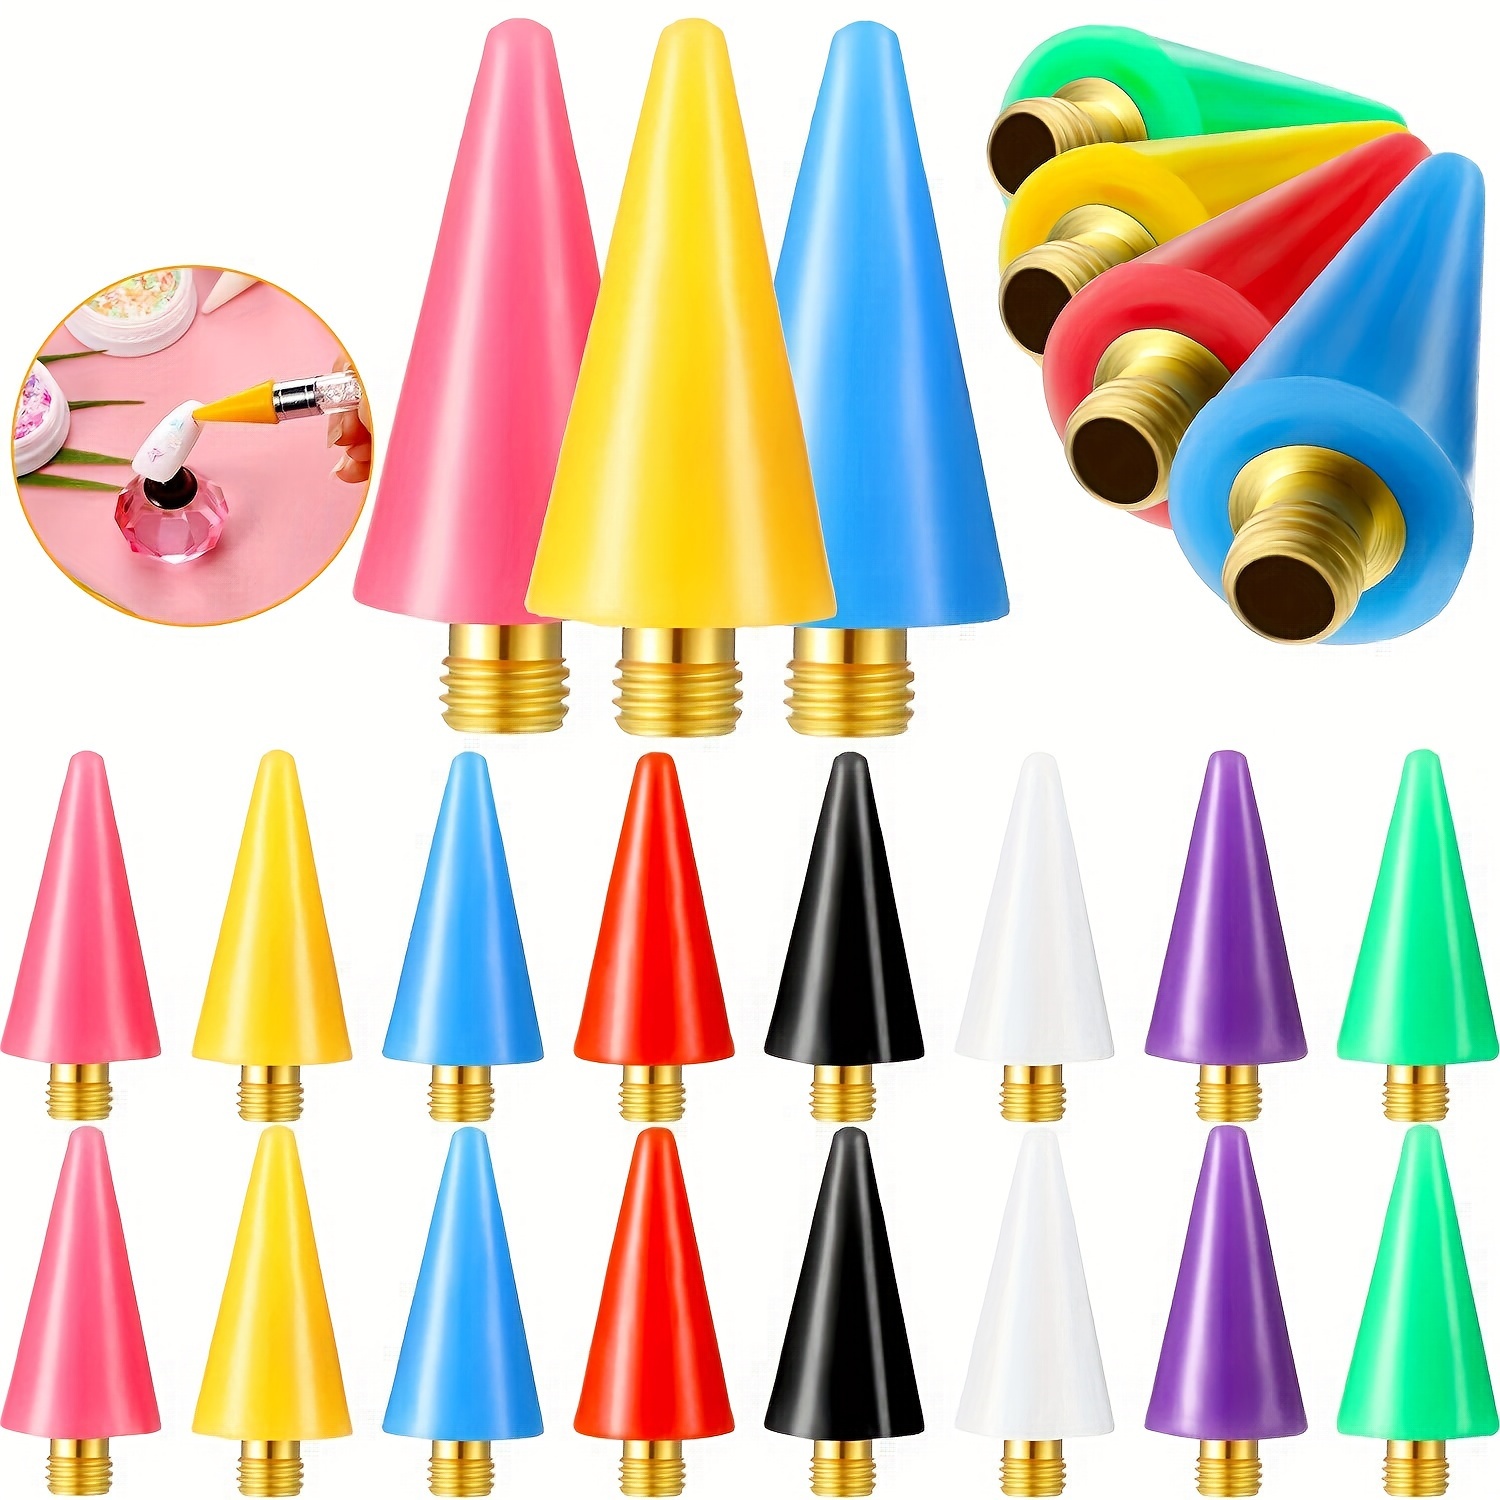 

16-piece Diamond Painting Tool Set With Self-adhesive Drill Pens, Wax Tips For 5d Diy Crafts, Cross Stitch & Nail Art - Copper Material